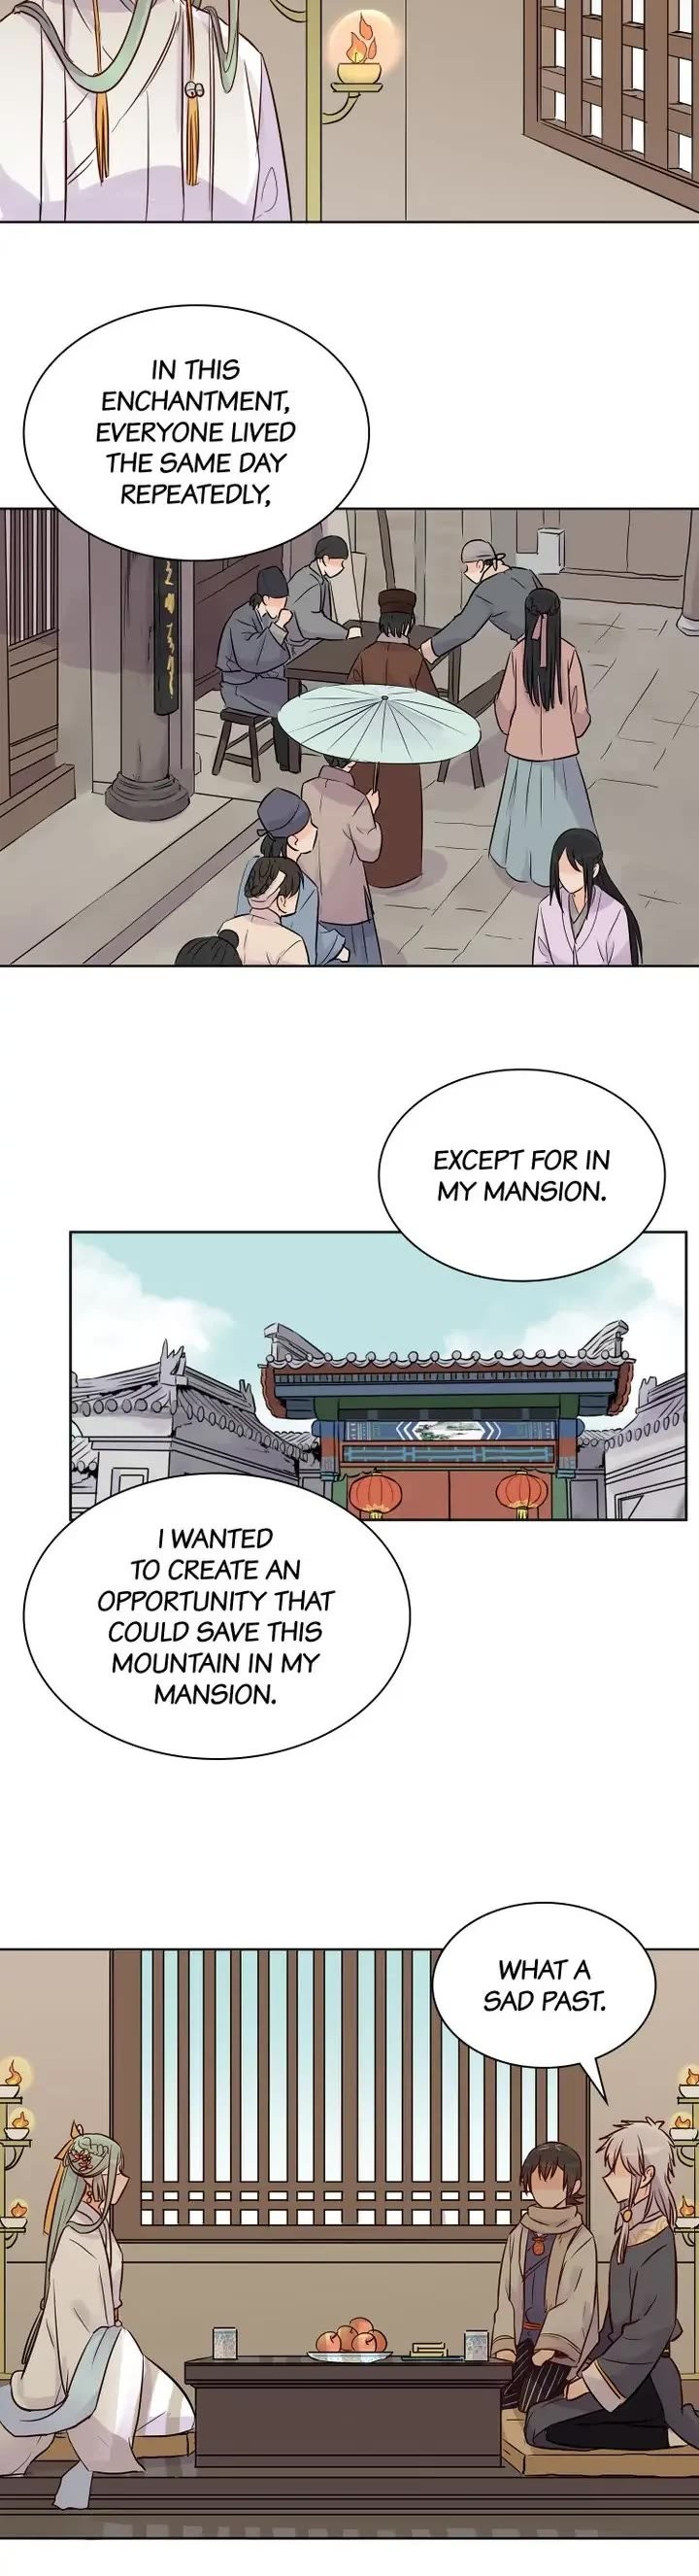 A Gust Of Wind Blows At Daybreak Chapter 21 Page 5